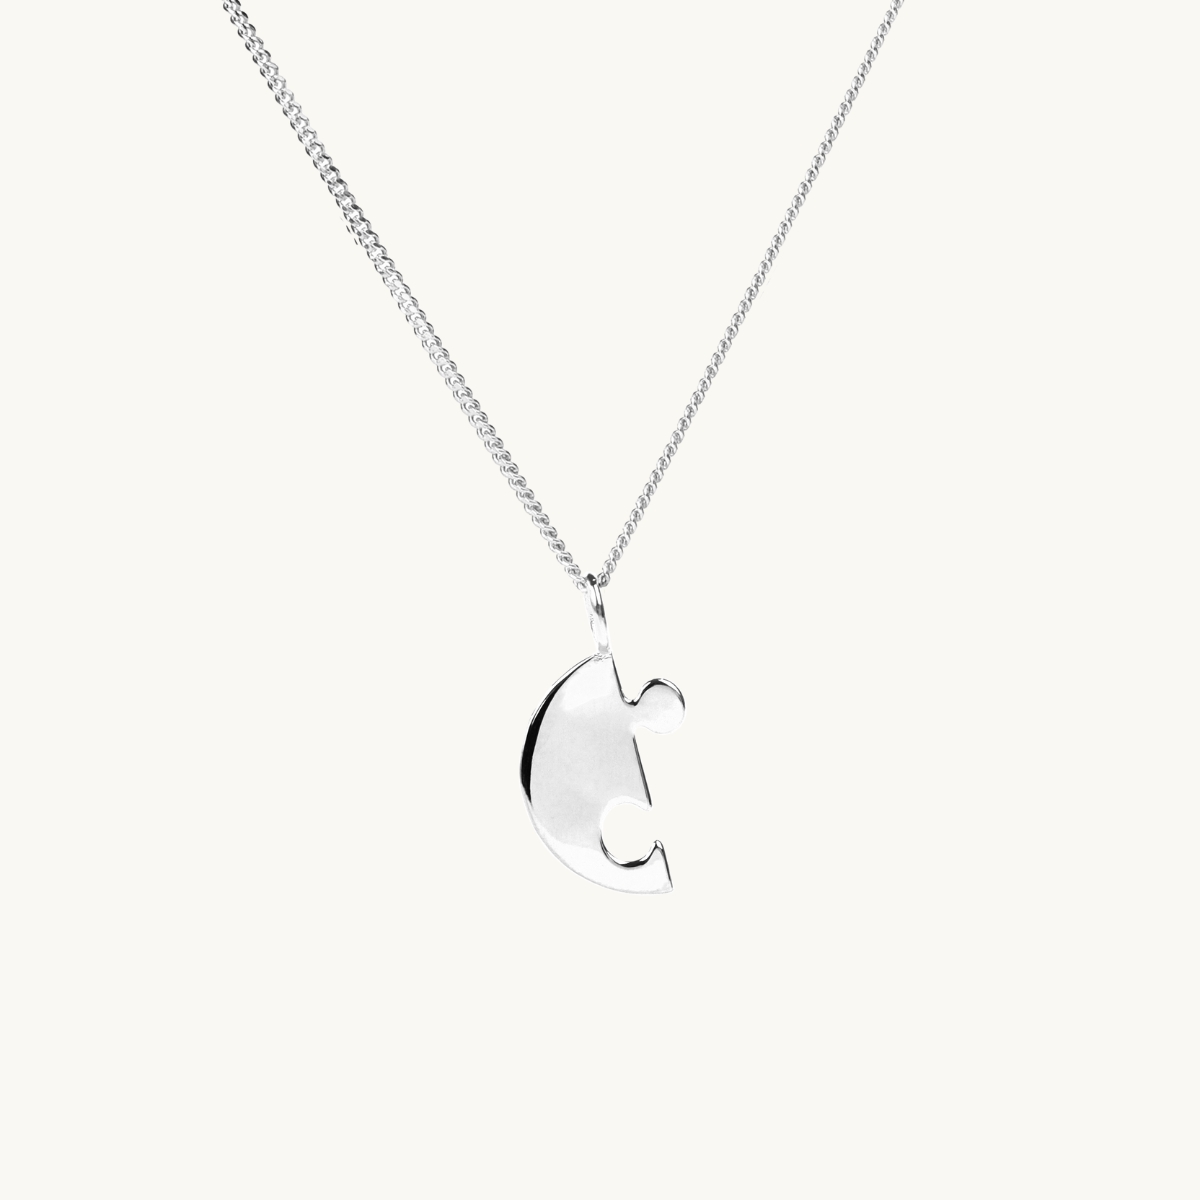 A puzzle necklace in silver